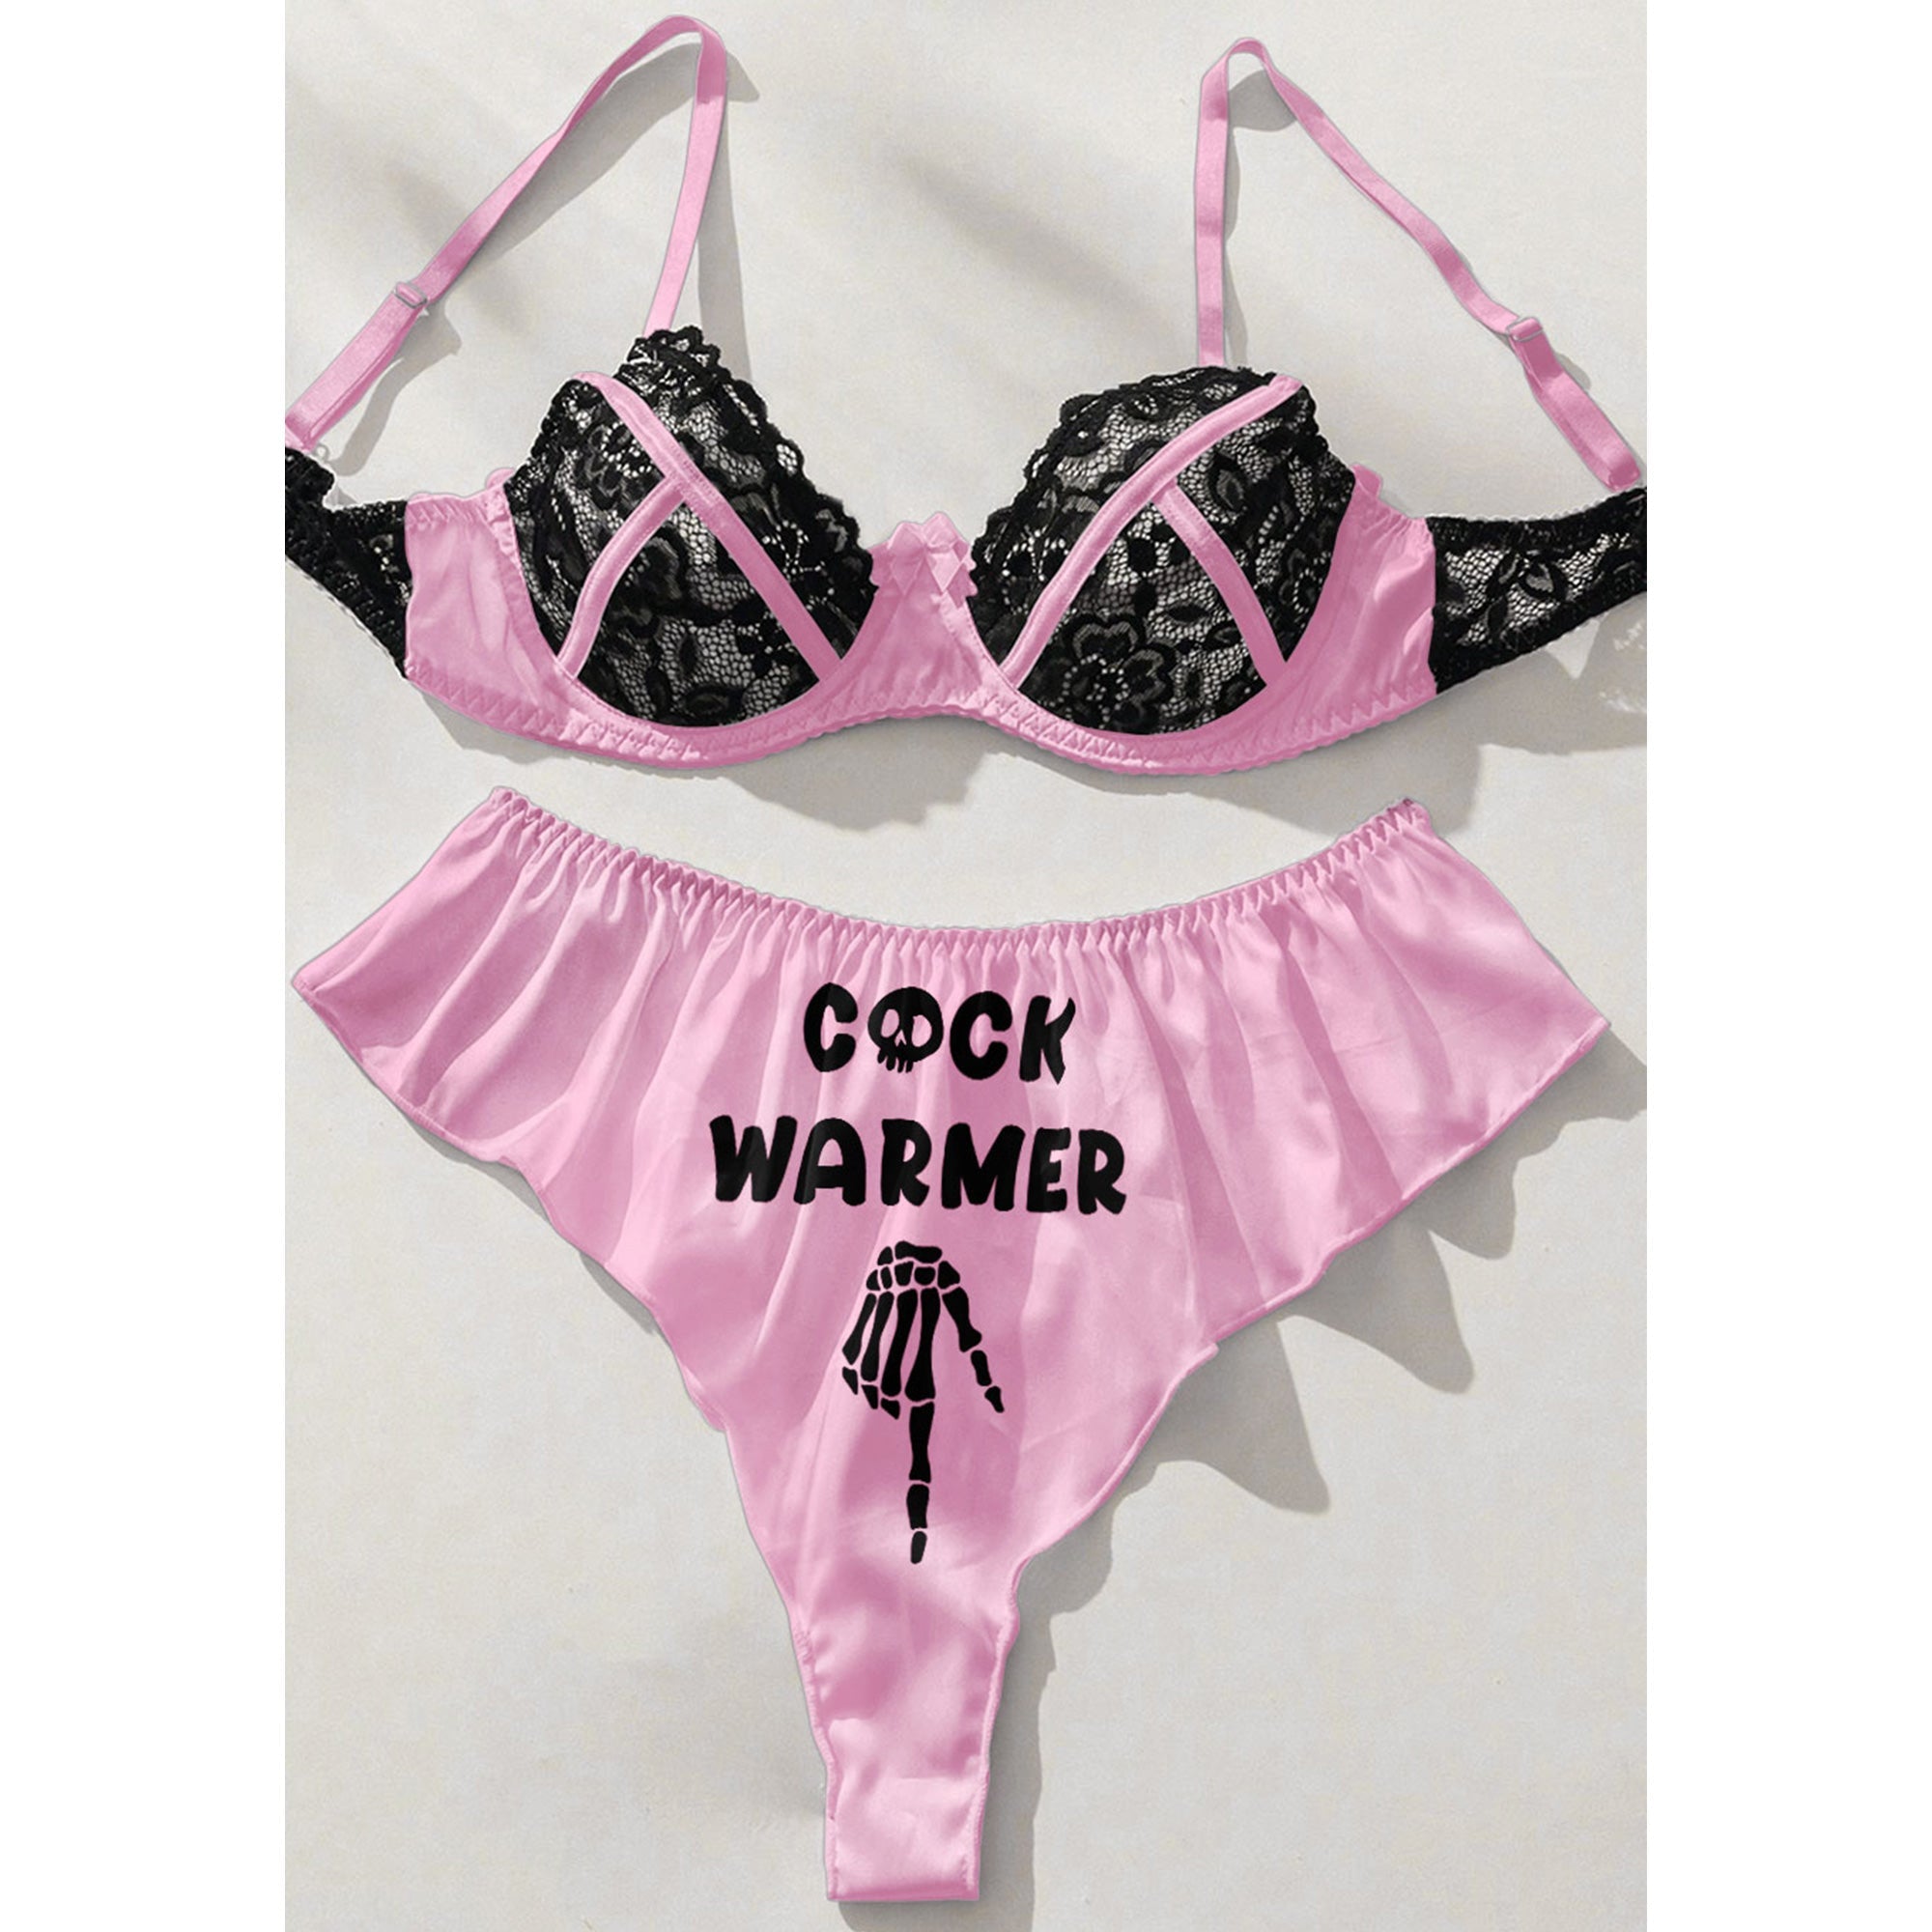 Shop for Pink, Lingerie, Womens